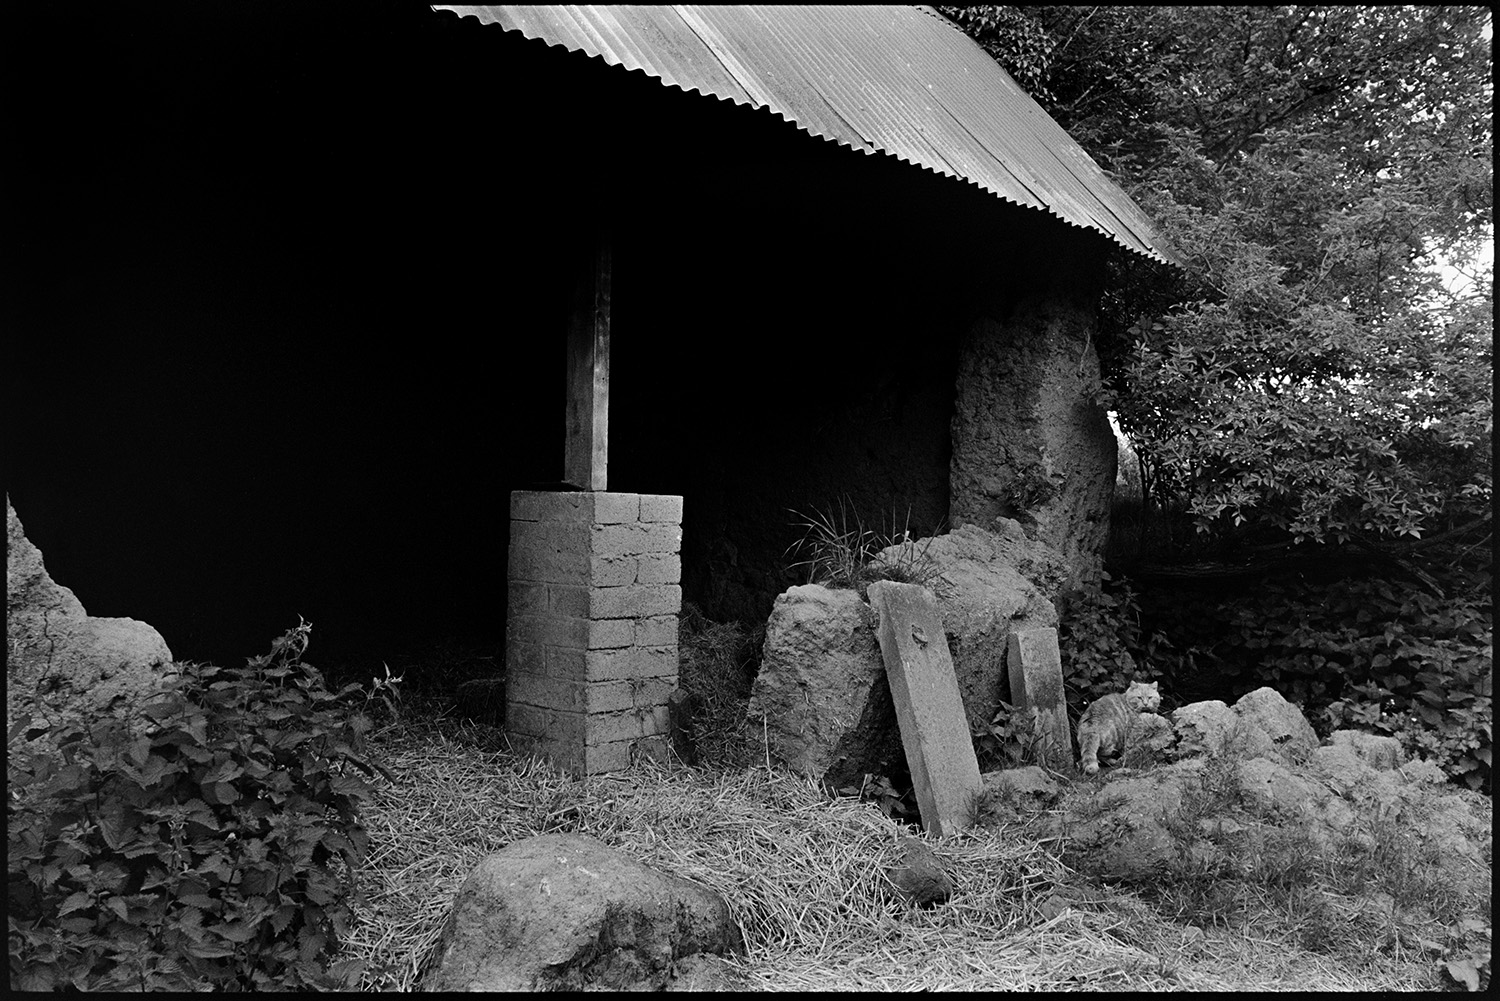 Cob barn with door and tallet in state of collapse.
[Collapsed wall of a cob barn with a corrugated iron roof at Coleford. Part of the collapsing cob wall is supported by concrete slabs. There is also a cat in front of the barn.]